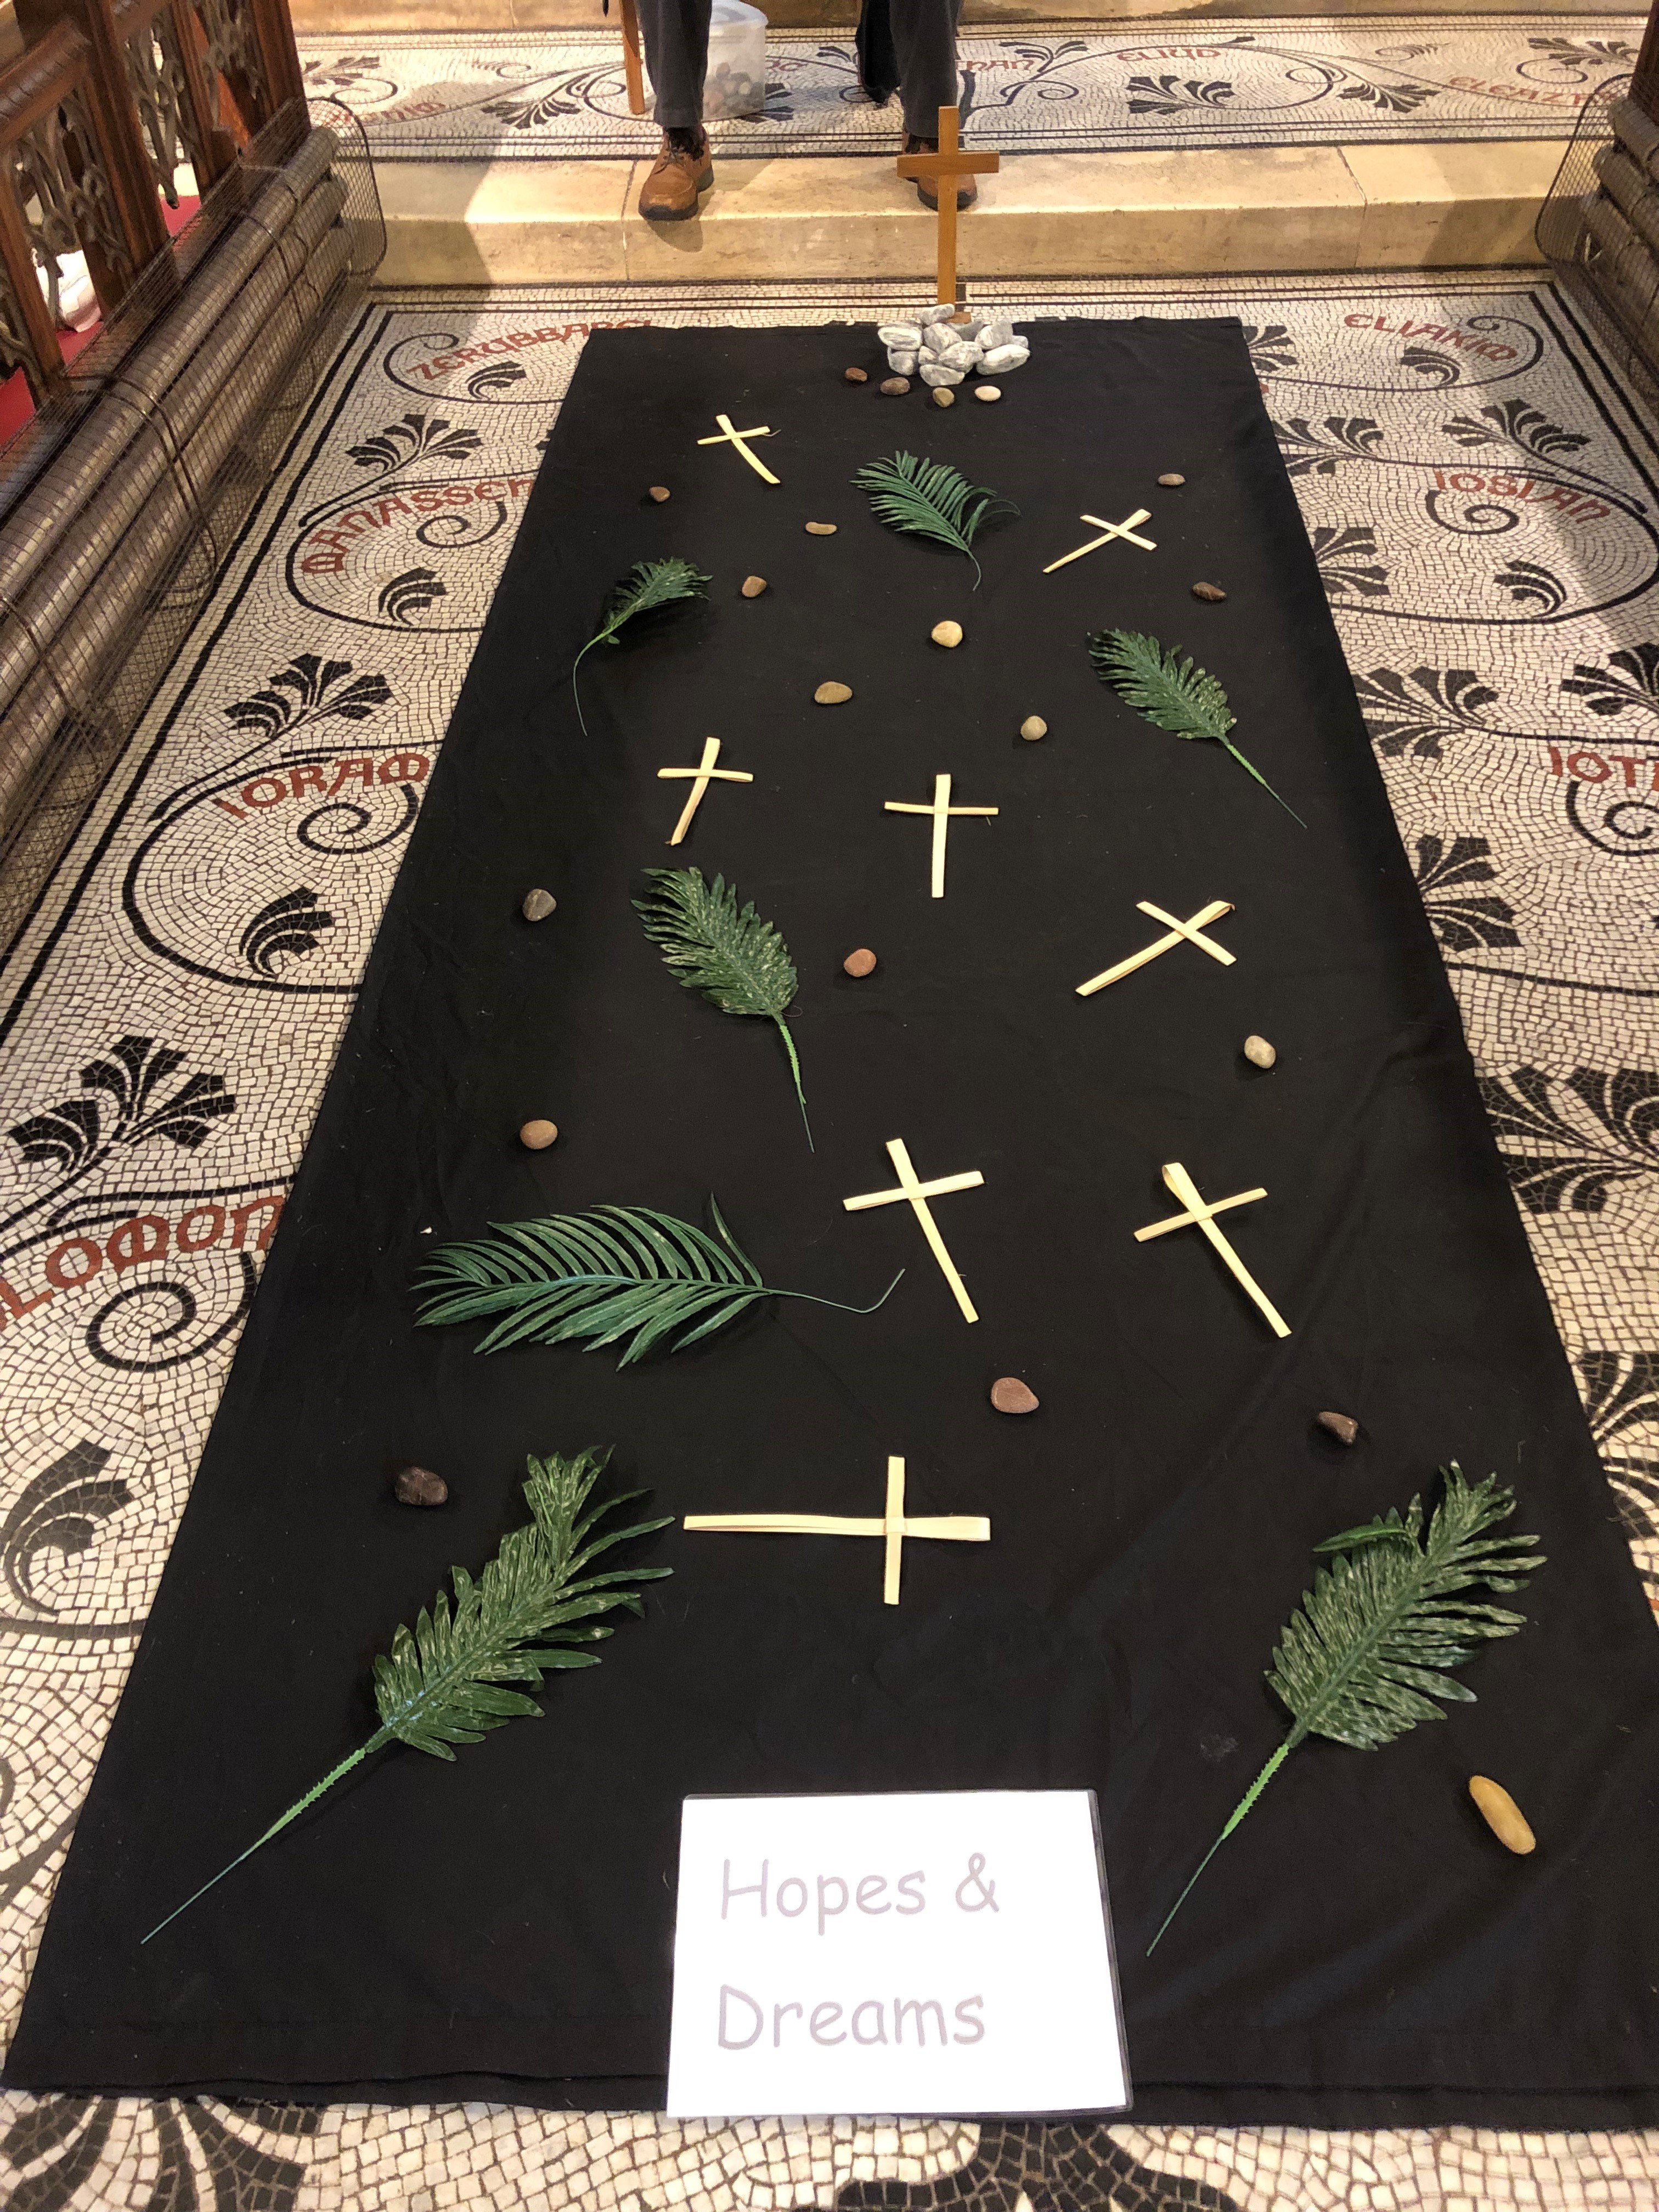 palms and crosses laid out on the floor to represent Palm Sunday